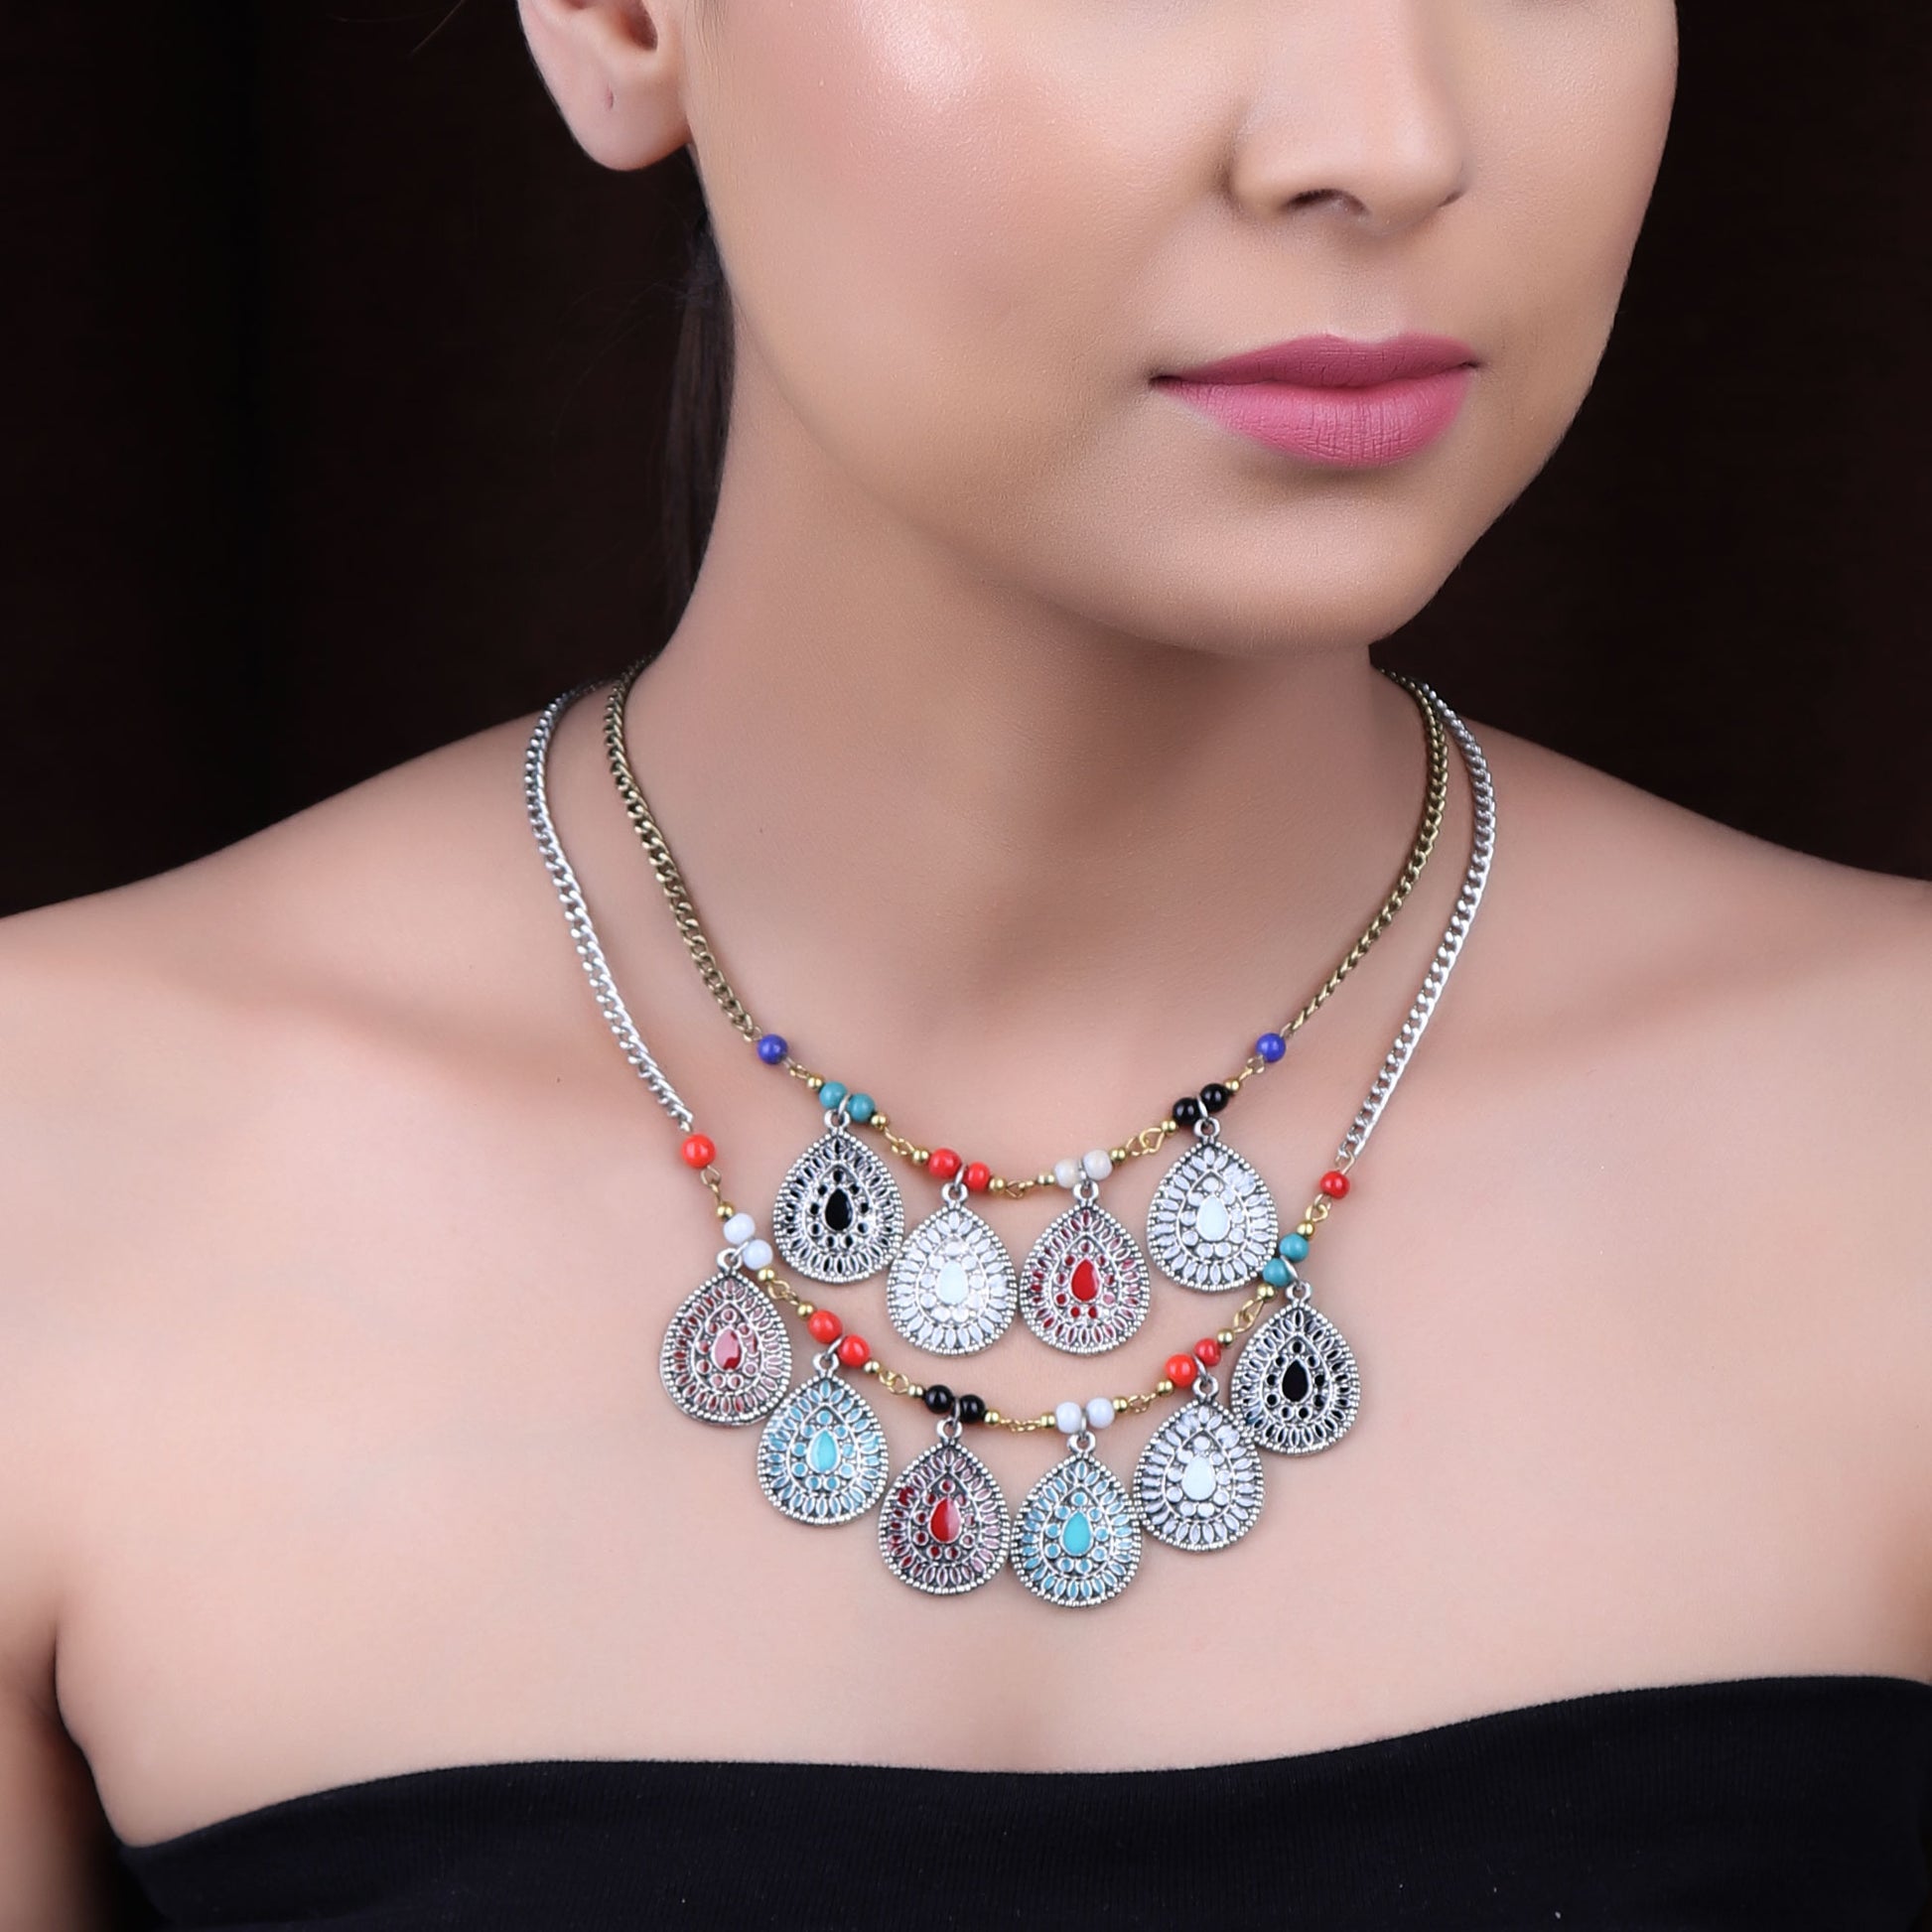 Necklace,The Dual Layered Souvenir Necklace - Cippele Multi Store